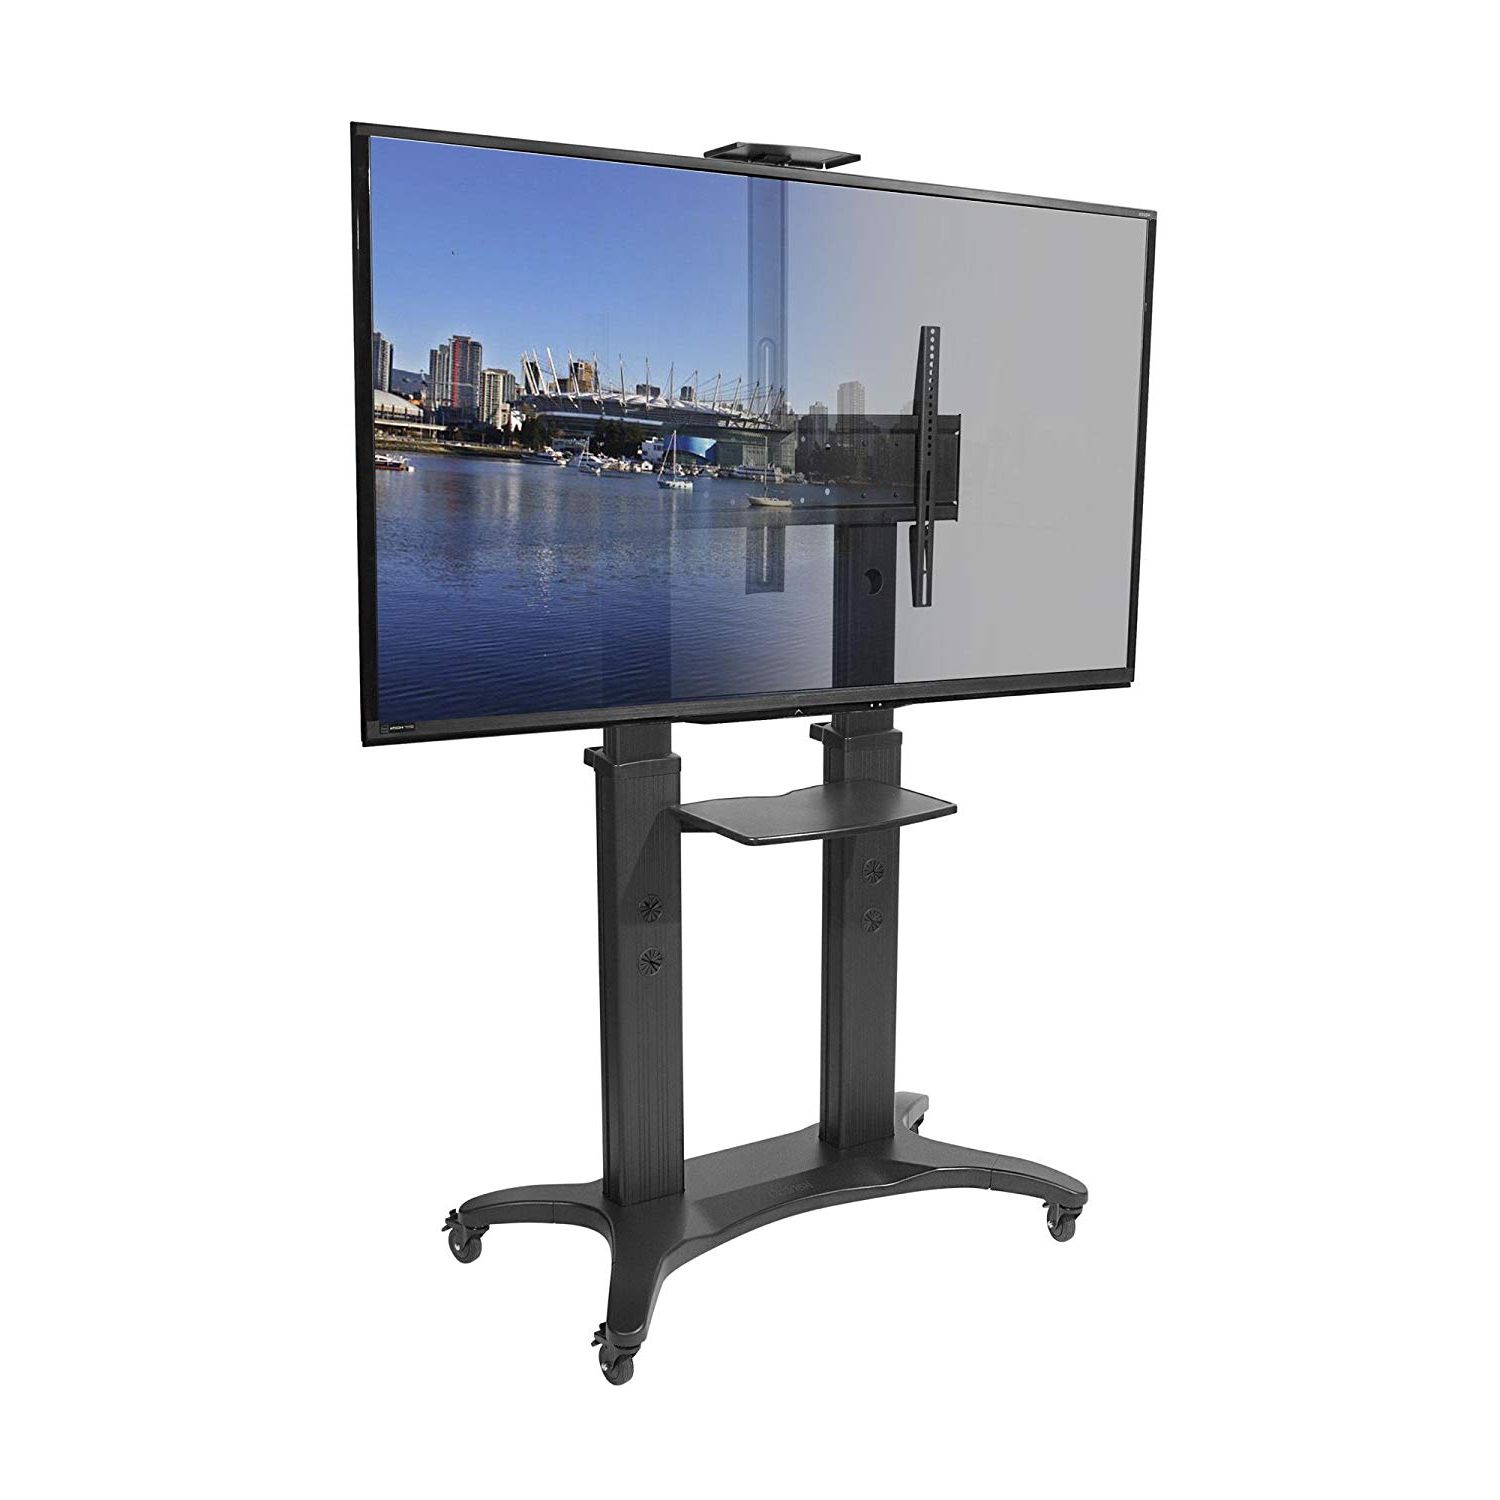 Kanto Mtma80pl Mobile Tv Stand For 55 80 Inch Flat Screen Displays Intended For Newest 80 Inch Tv Stands (View 19 of 20)